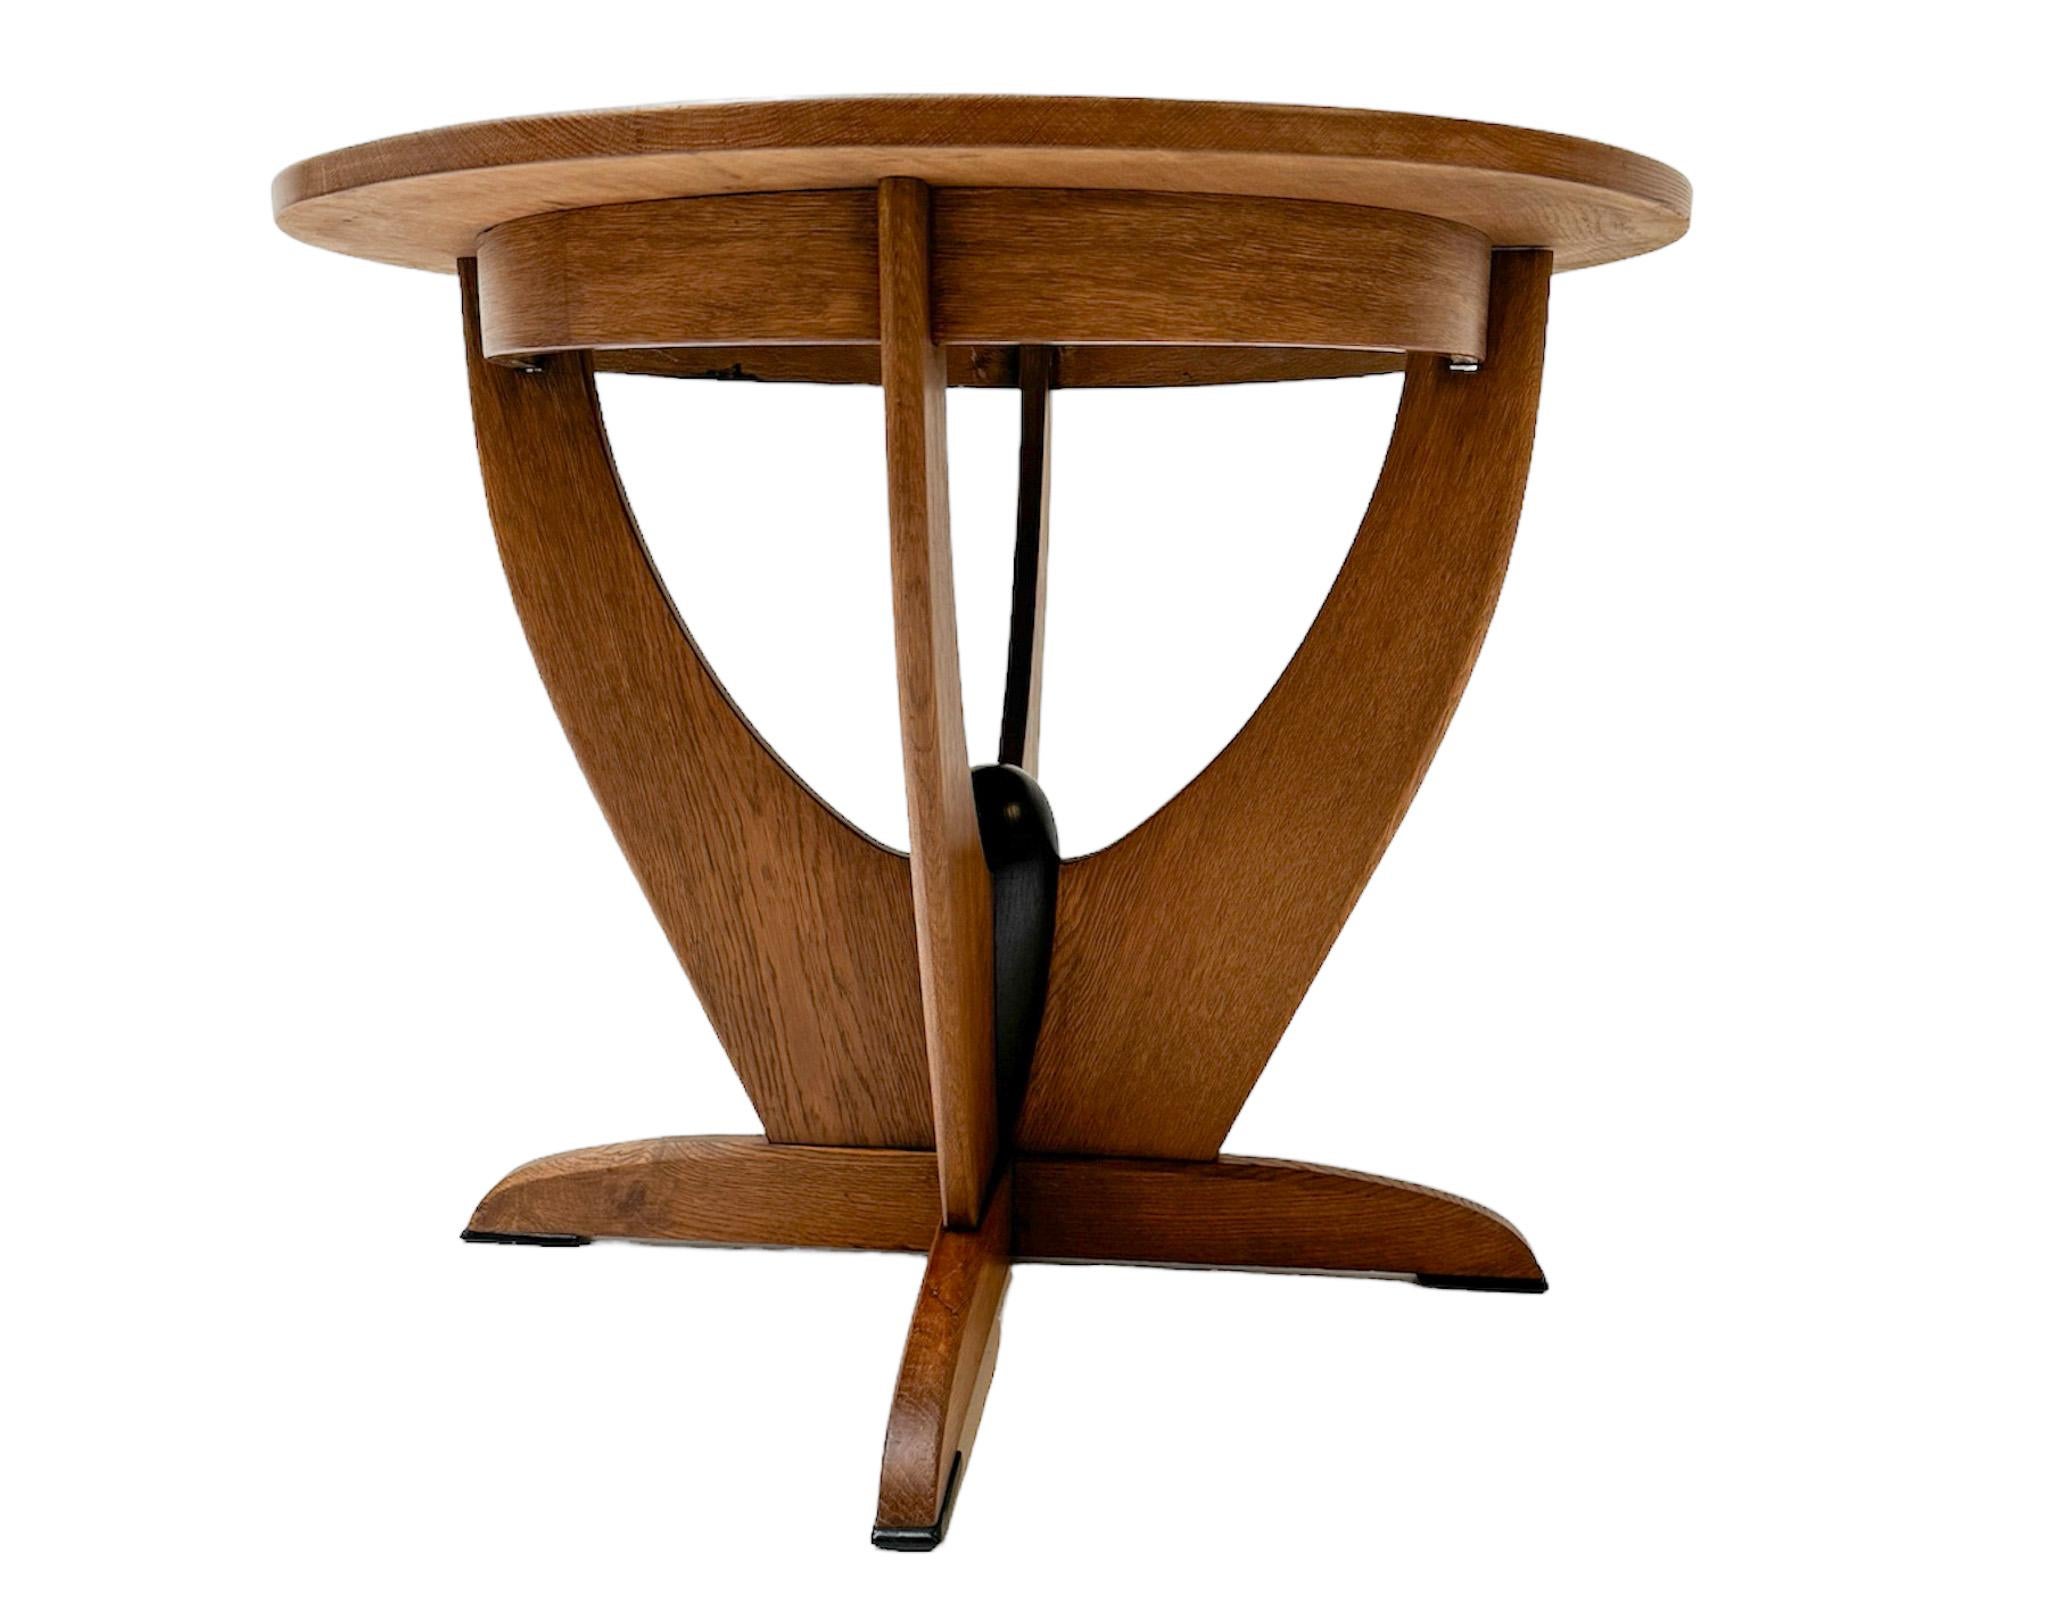 Dutch Oak Art Deco Amsterdamse School Center Table by Paul Bromberg for Metz & Co. For Sale